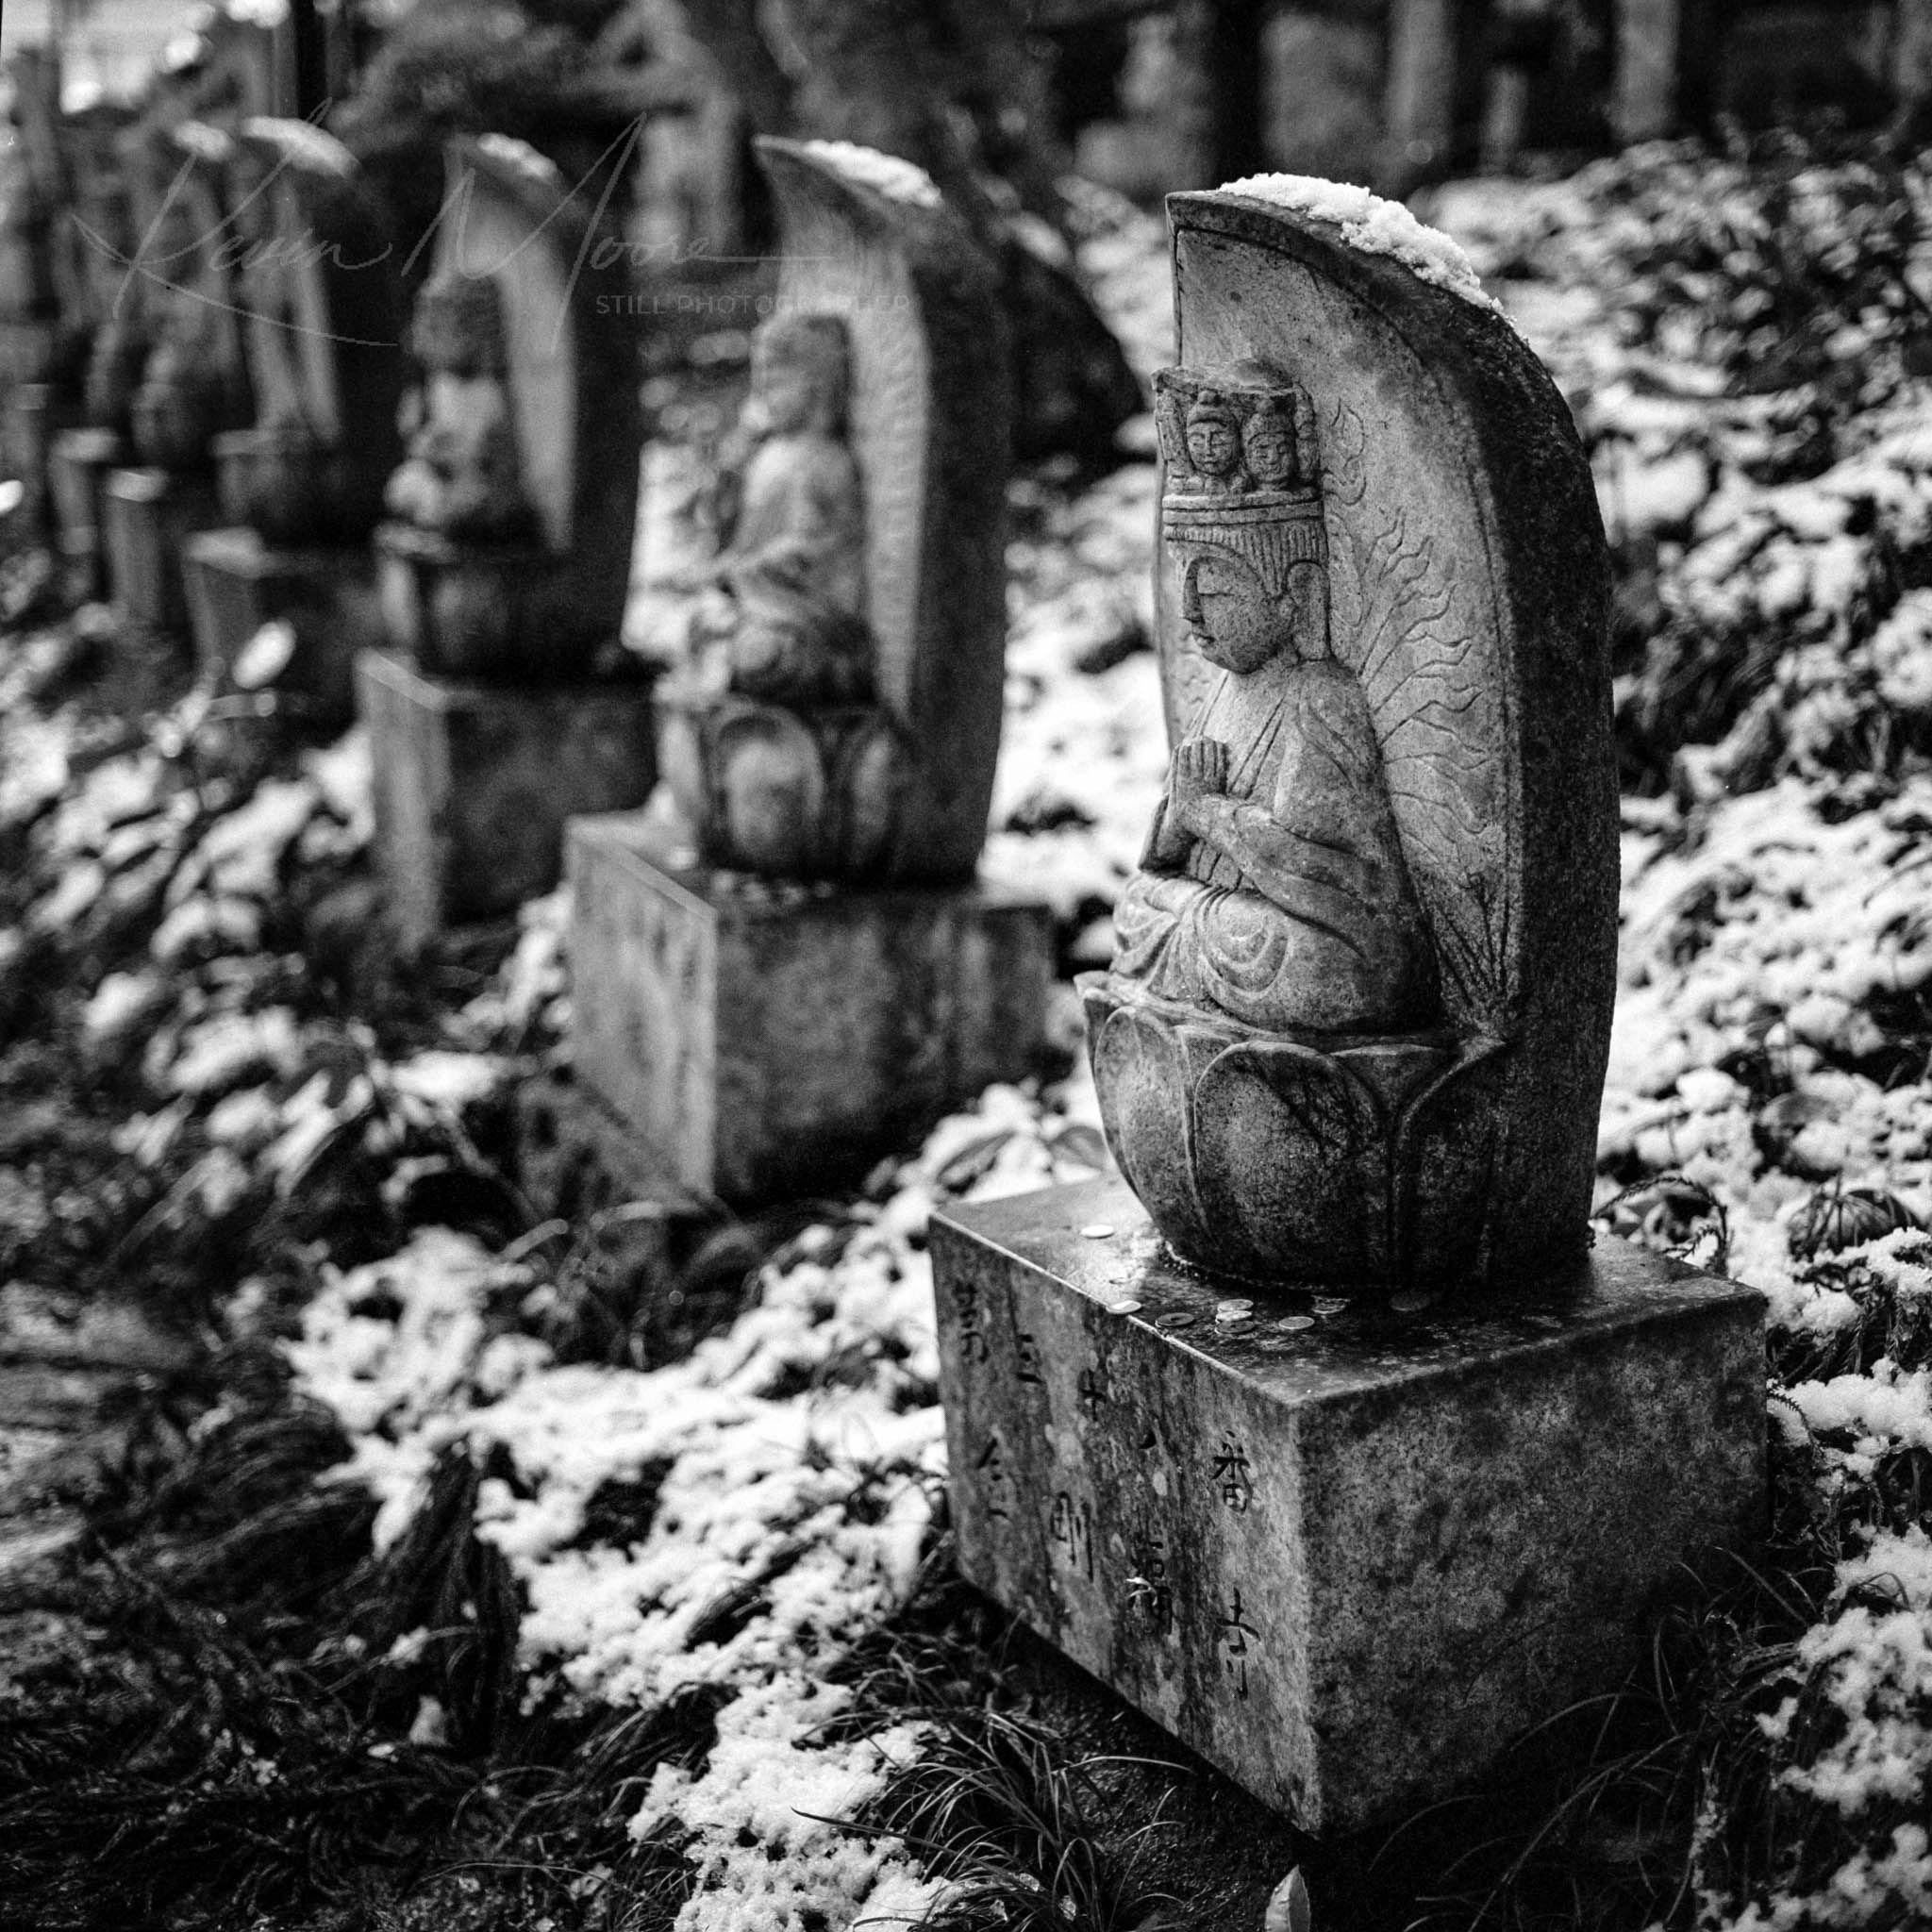 Buddhist-inspired stone figures in serene, snow-dusted outdoor setting, captured in black and white.